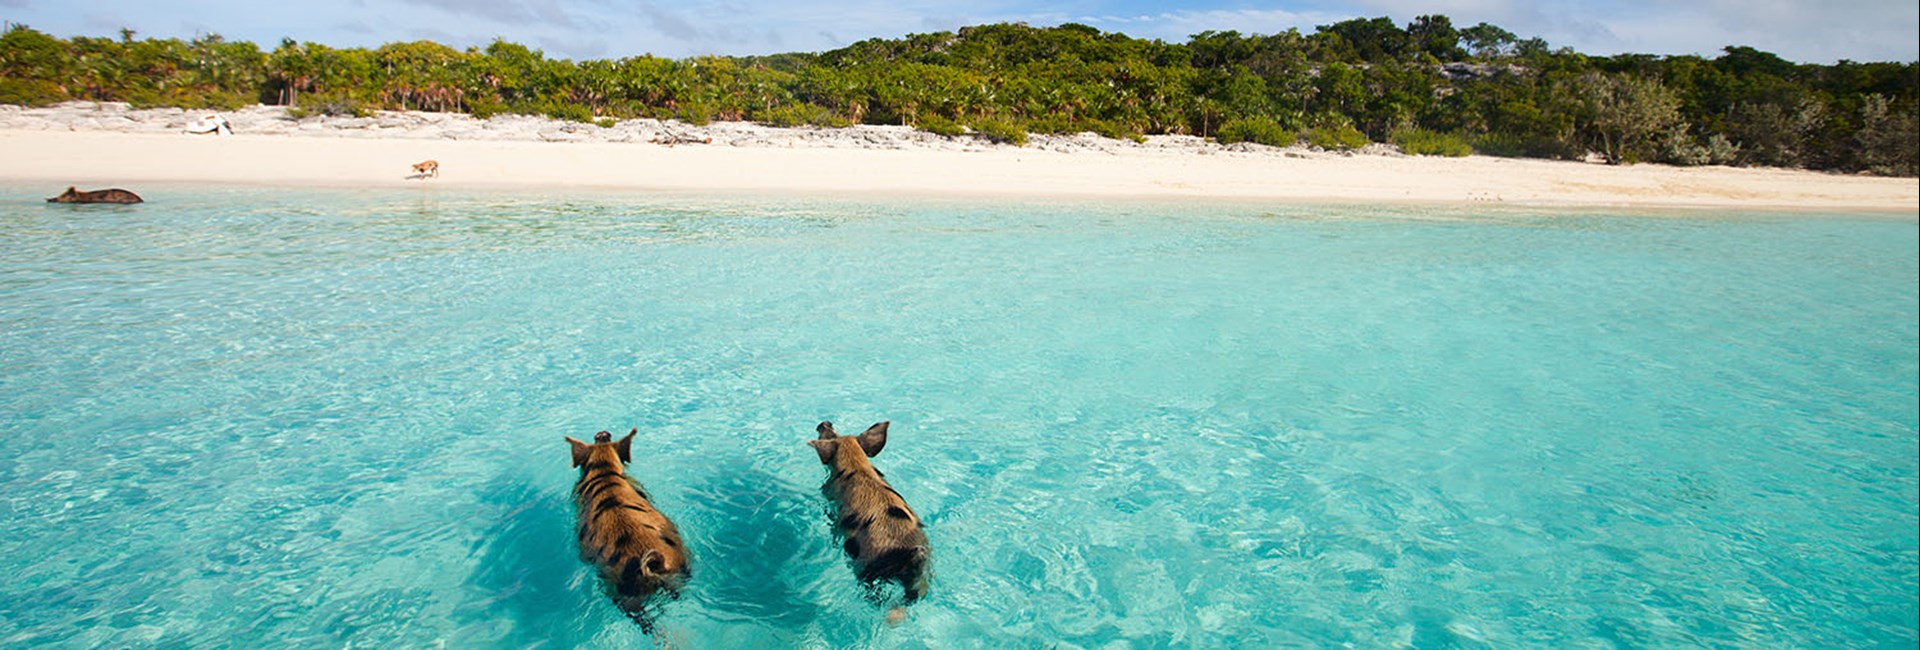 Two pigs swimming in tropical sea